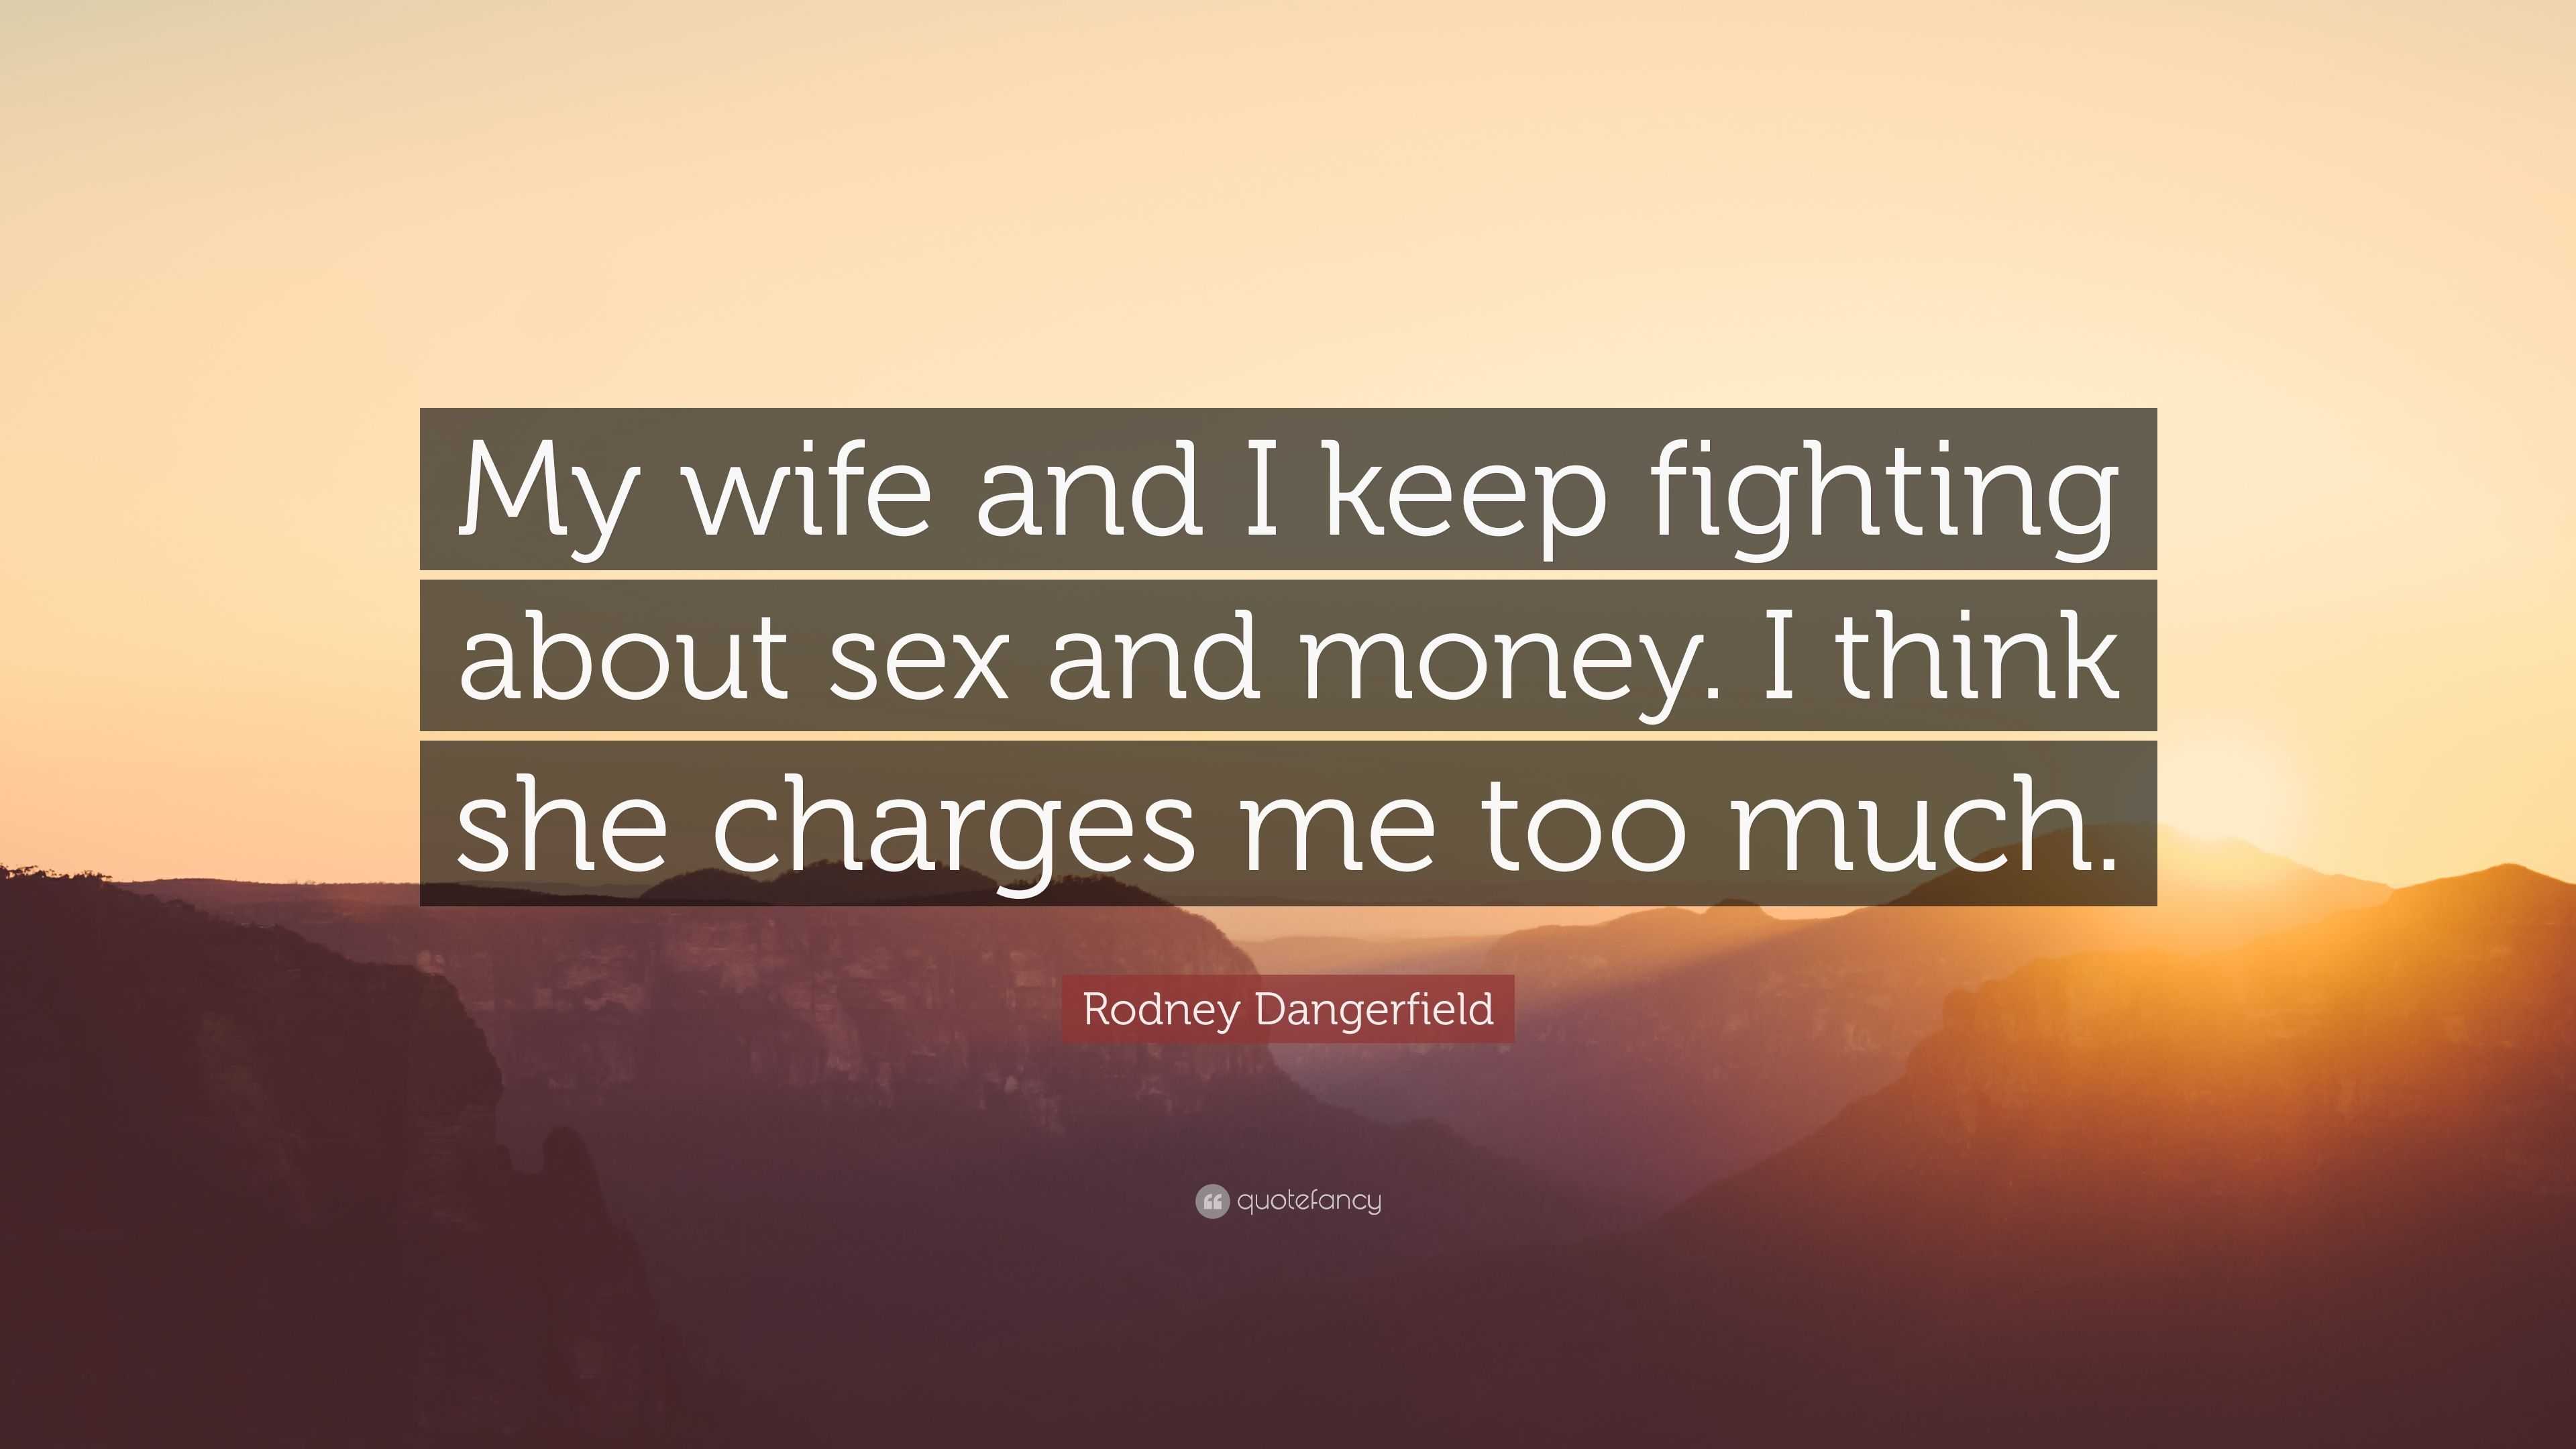 Rodney Dangerfield Quote “My wife and I keep fighting about sex and money picture